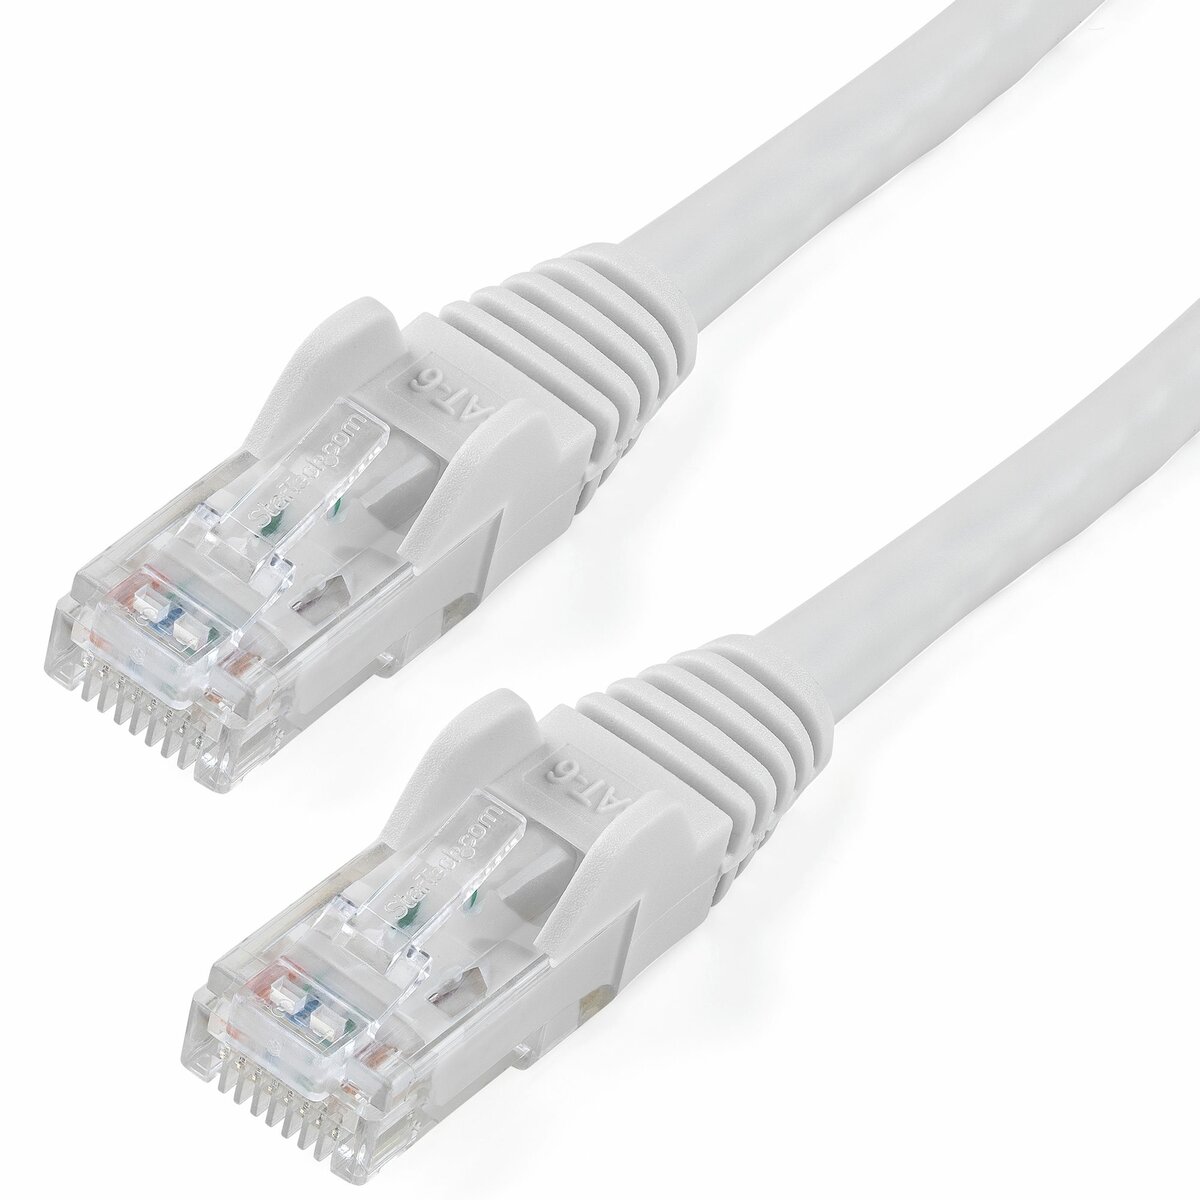 GRAY 14 FT UTP Cat.6 Ethernet Patch Cable US-A-81972-5 Pcs / Pack SKU UL CMR 23AWG Made in USA Super E cable